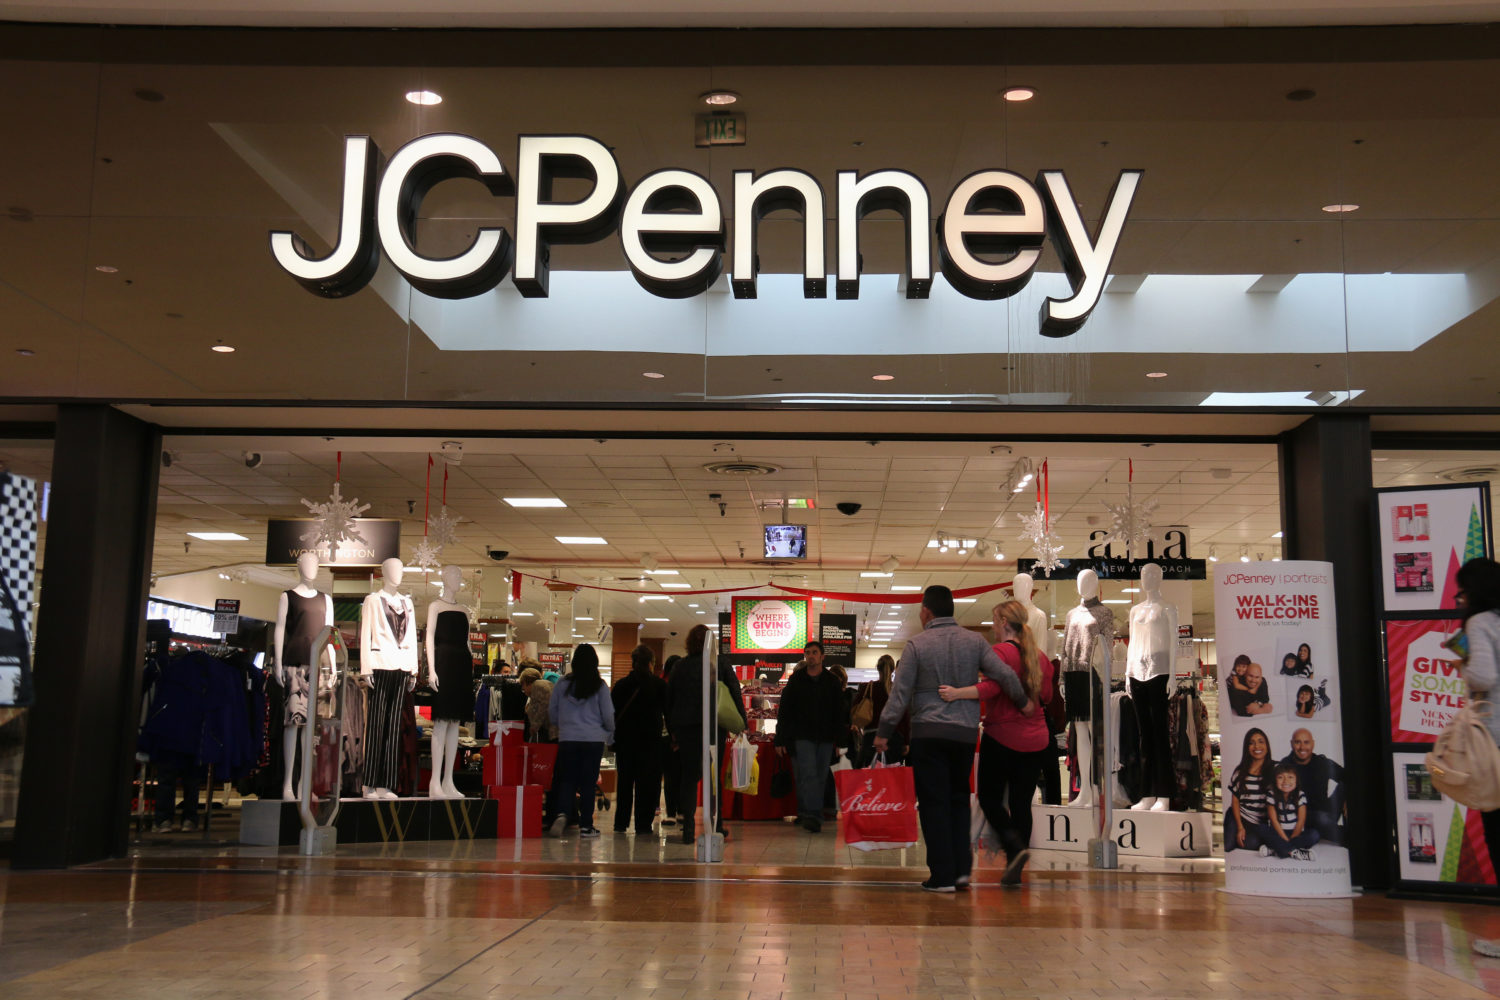 jcpenney didn't receive mattress protector